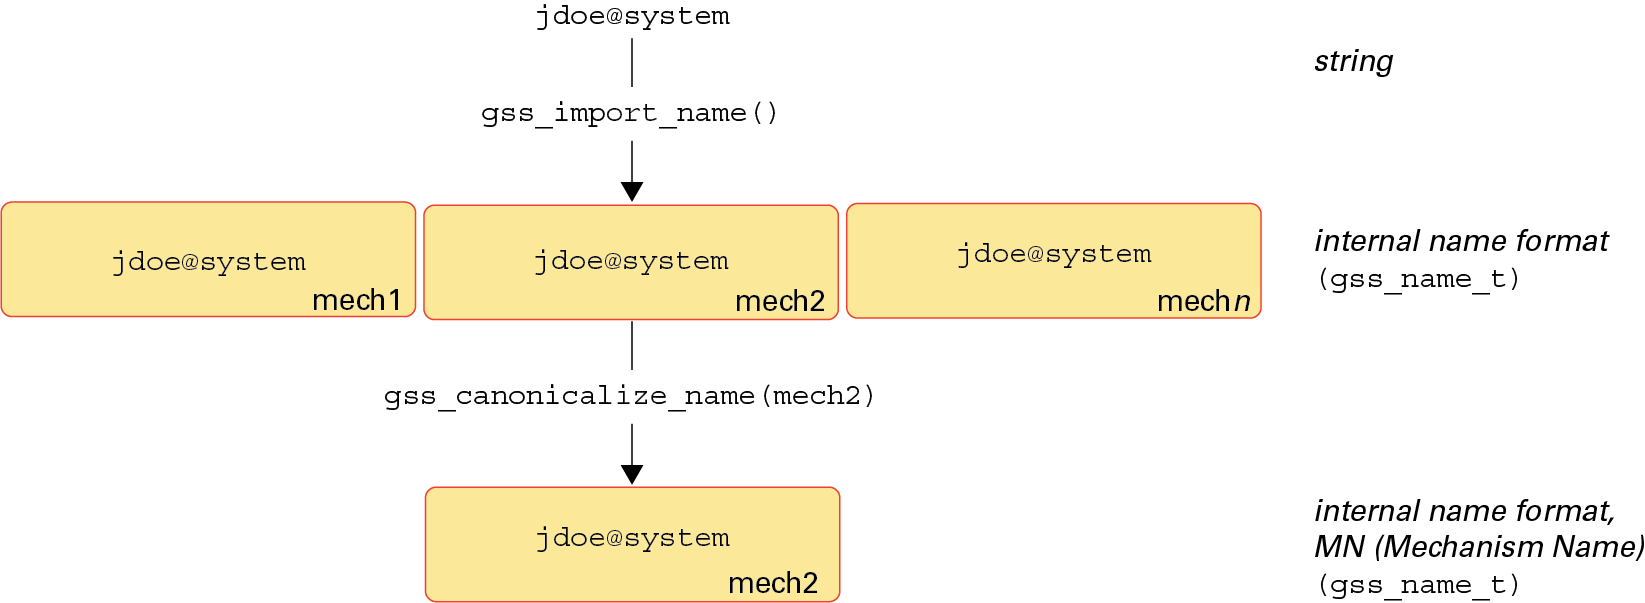 image:Diagram shows how mechanism names are derived.